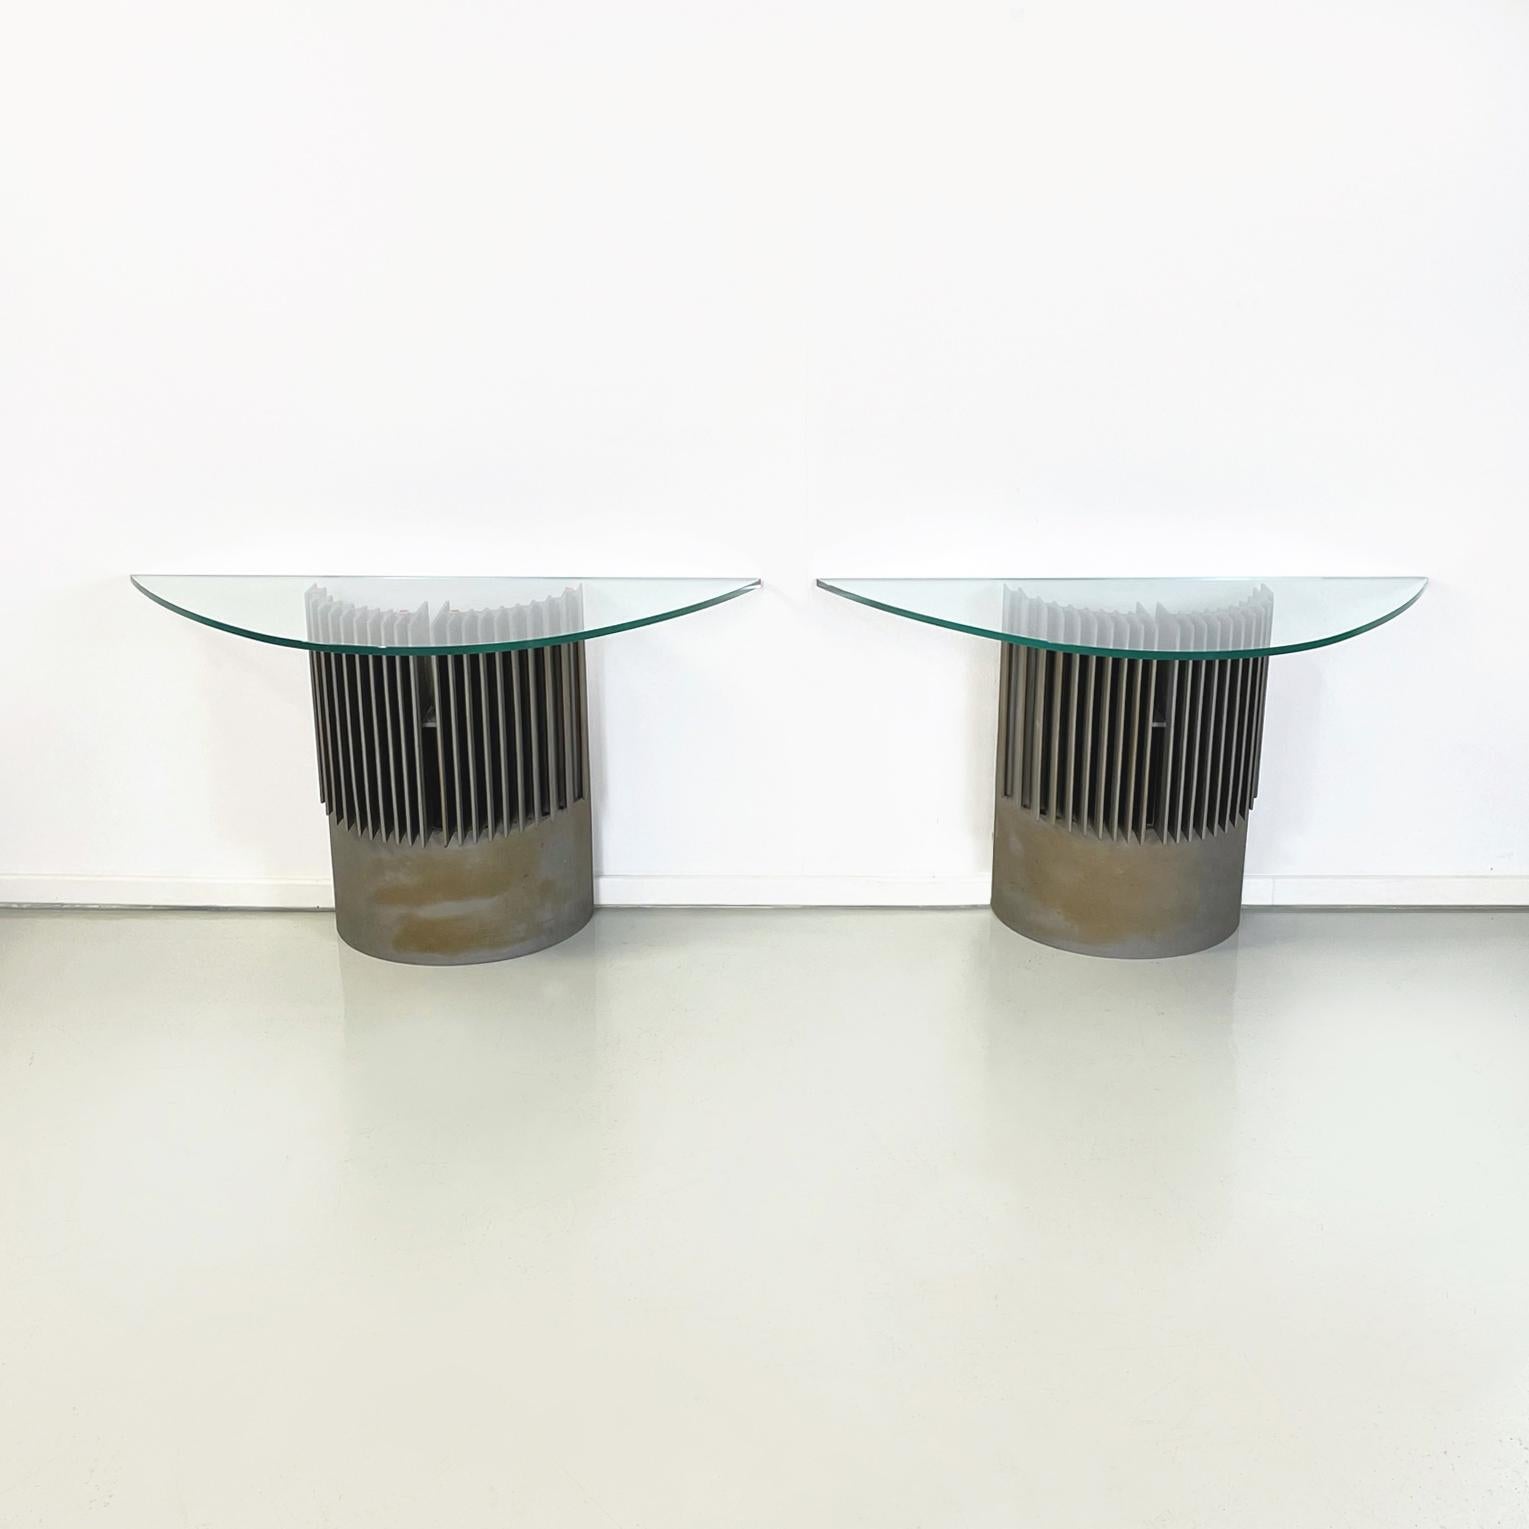 Italy modern glass and cast iron consoles by Giovanni Offredi for Saporiti Italia, 1970s
Pair of consoles with semi-oval top in thick glass. The cast iron base is composed by an upper part made up of vertical slats and a semi-circle in lower